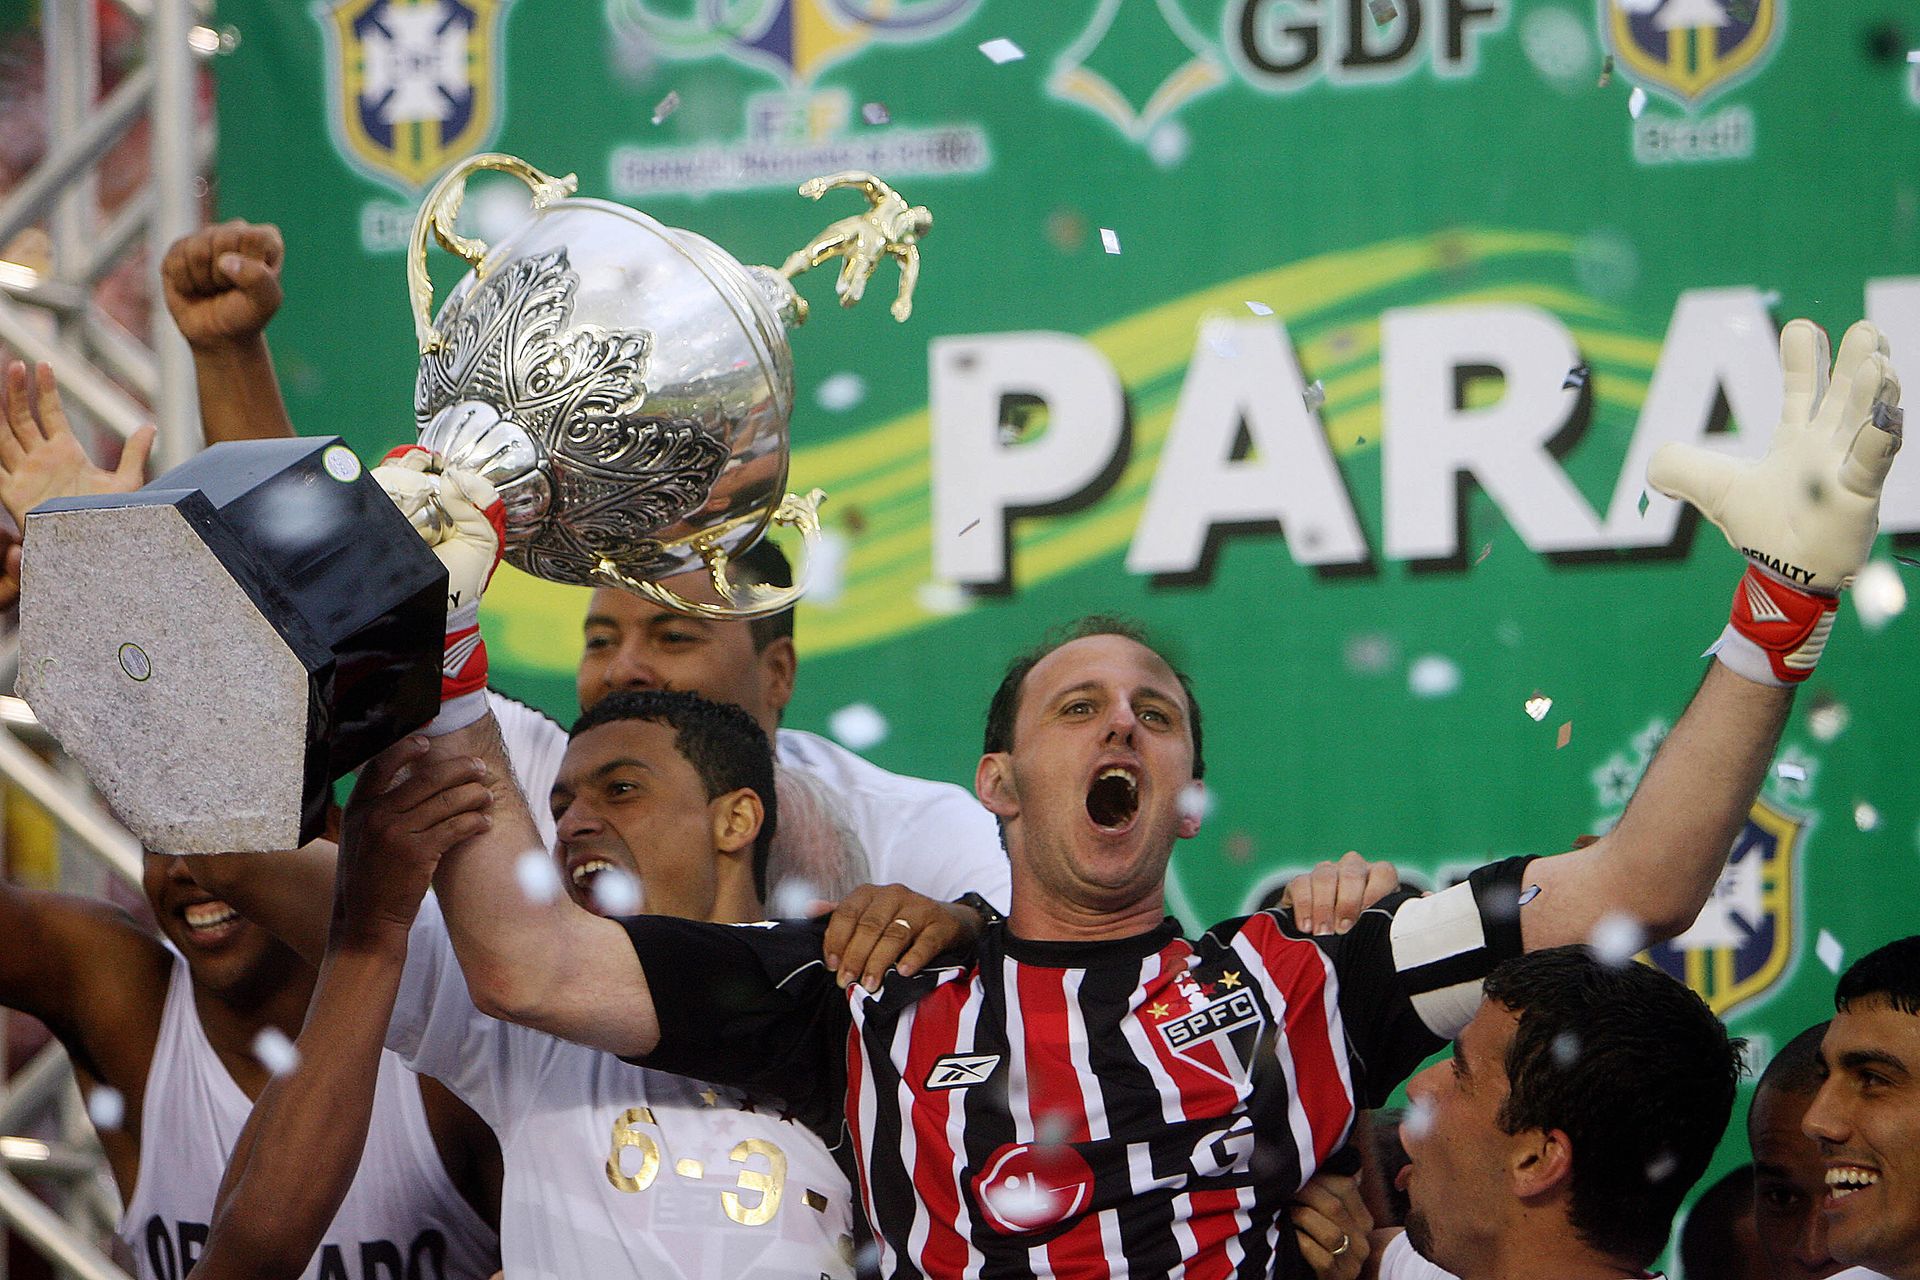 <p>                     One of the best Brazilian goalkeepers of his generation, Rogerio Ceni was also Sao Paulo's set-piece taker between 1997 and his retirement in 2015.                   </p>                                      <p>                     Ceni scored over 100 career goals for Sao Paulo in over 1,000 appearances for the club. He was part of the Brazil squad which won the 2002 World Cup. In total, he won 17 caps for his country.                   </p>